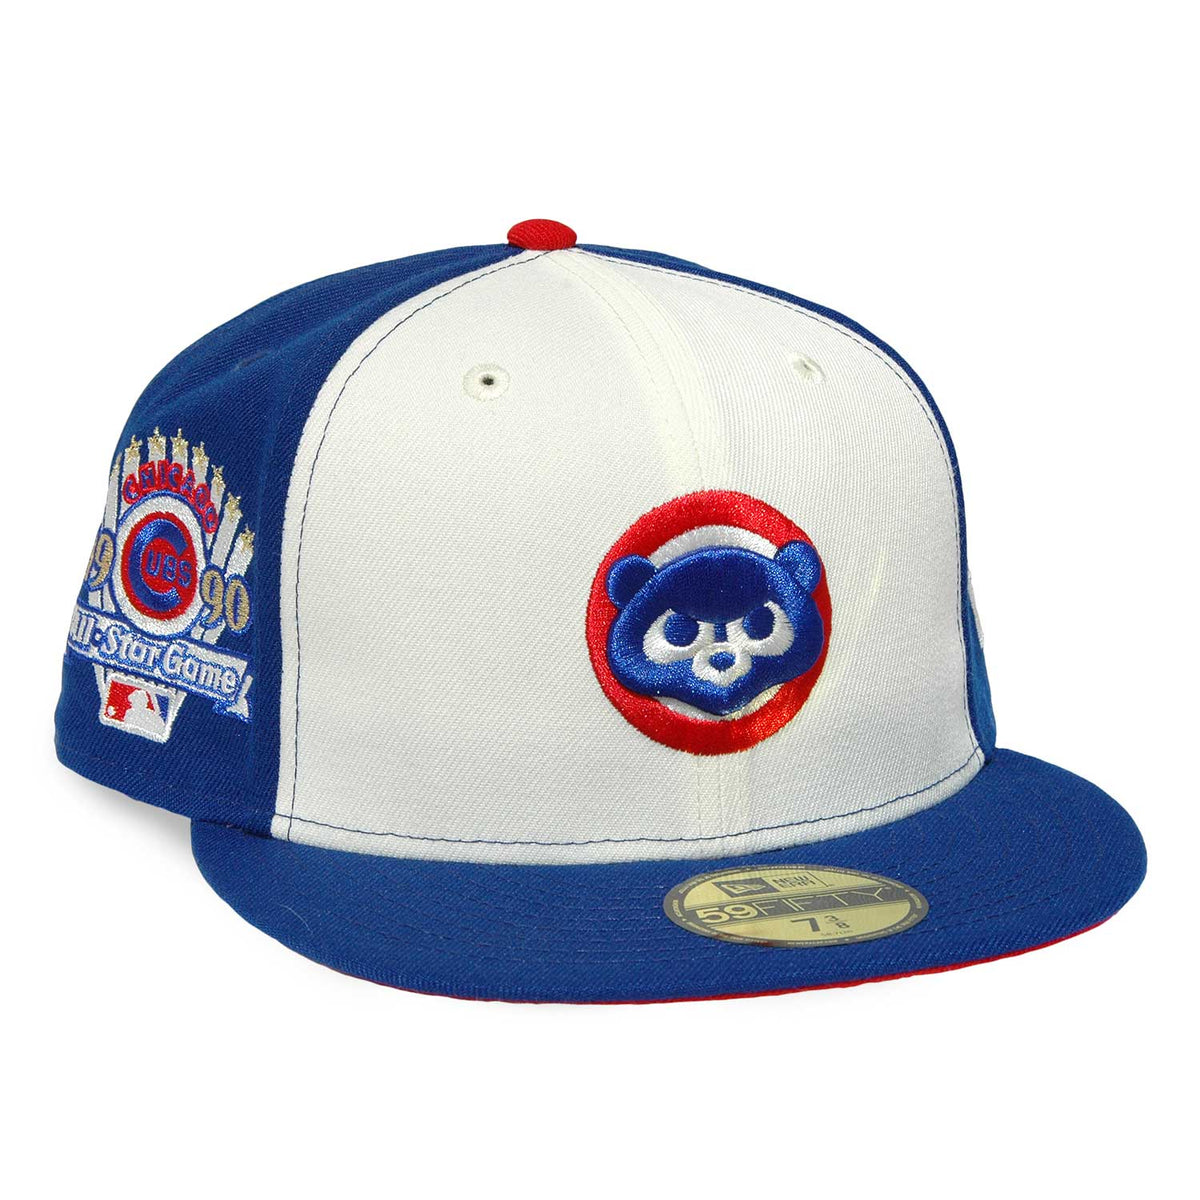 Chicago Cubs 1968 / 1990 All-Star Game 59FIFTY Fitted Hat by New